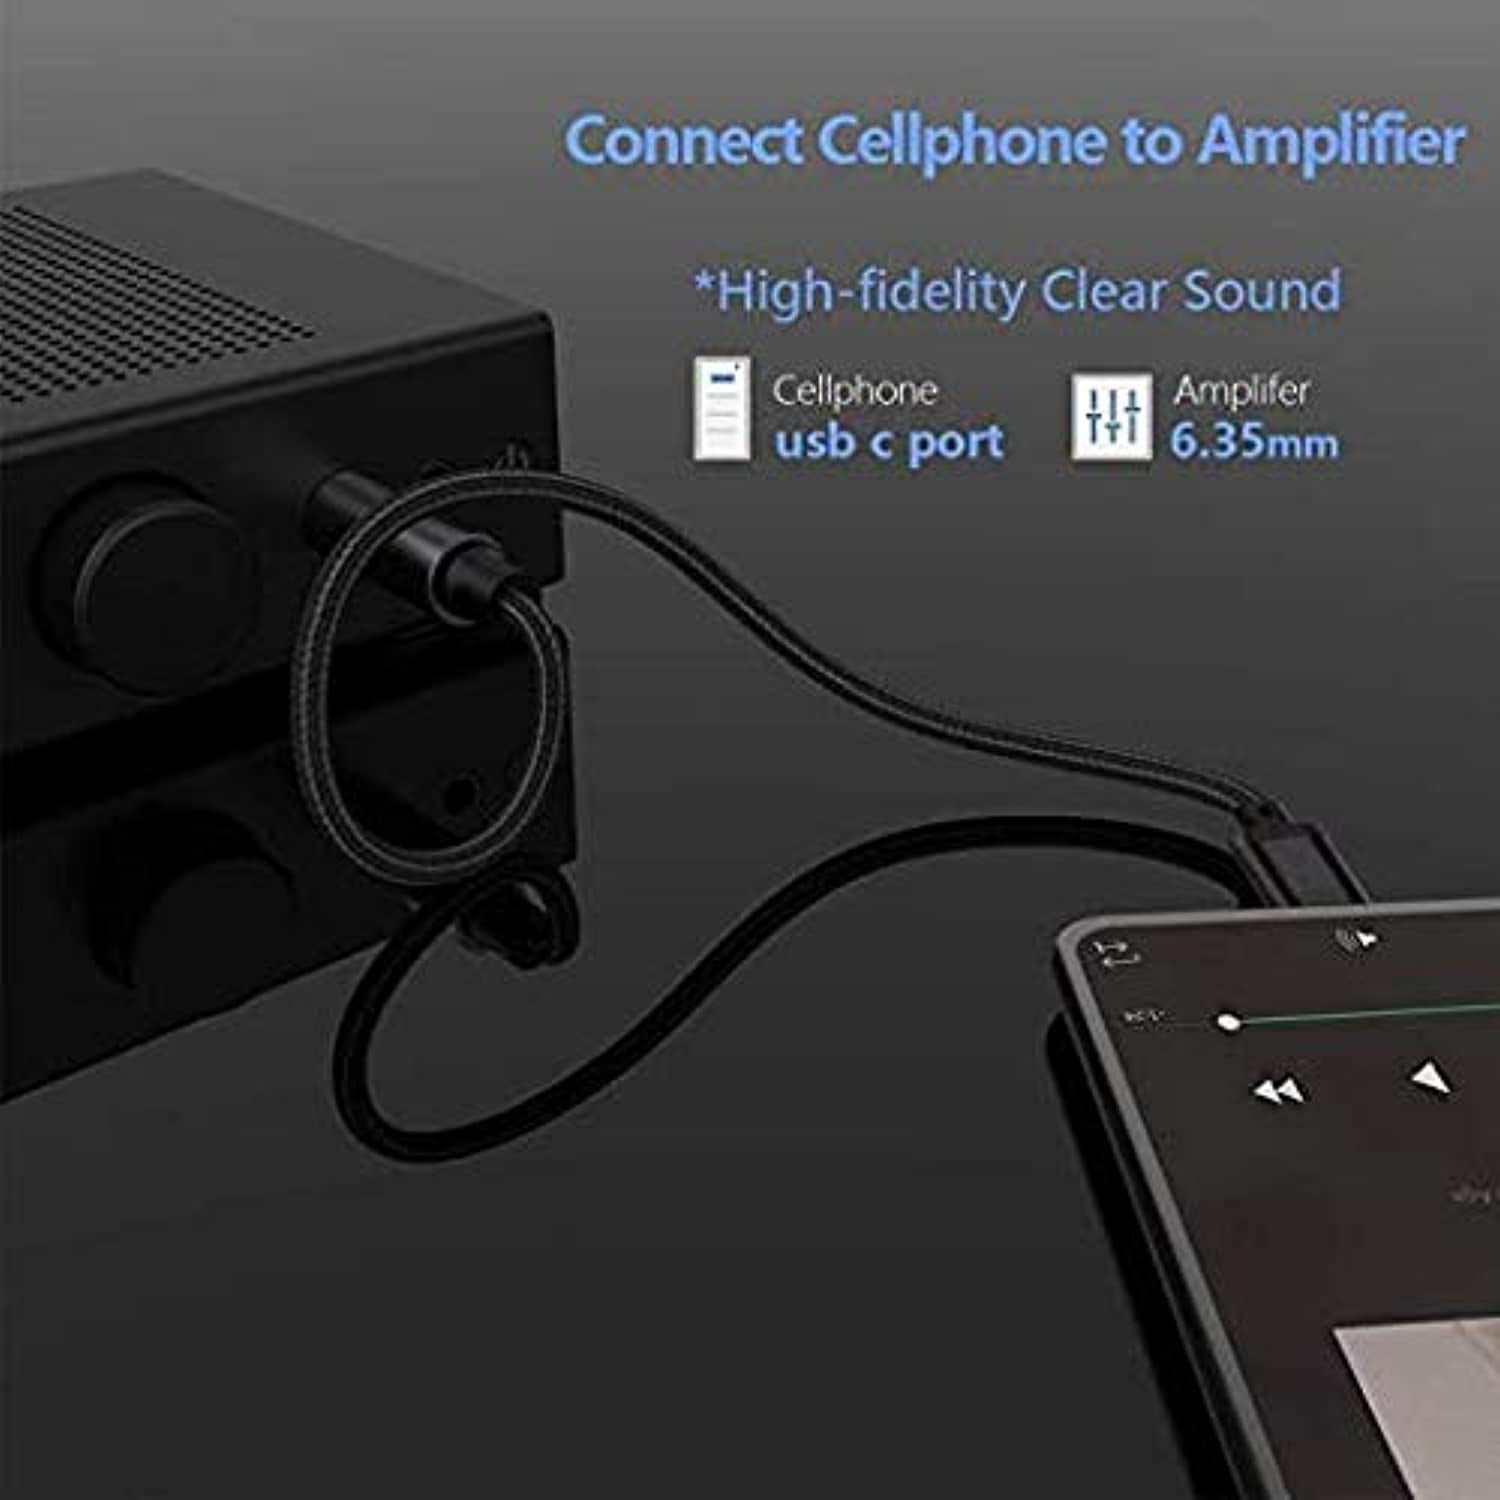 Amplifier USB C to 6.35mm 1/4 inch TRS Cable VOJOTO USB Type C to 1/4 inch Audio Adapter Aux Jack Stereo Cable for Google Pixel 4XL 3.3FT Speaker Headphone Mixing Console Galaxy Note 10+/S20+ 